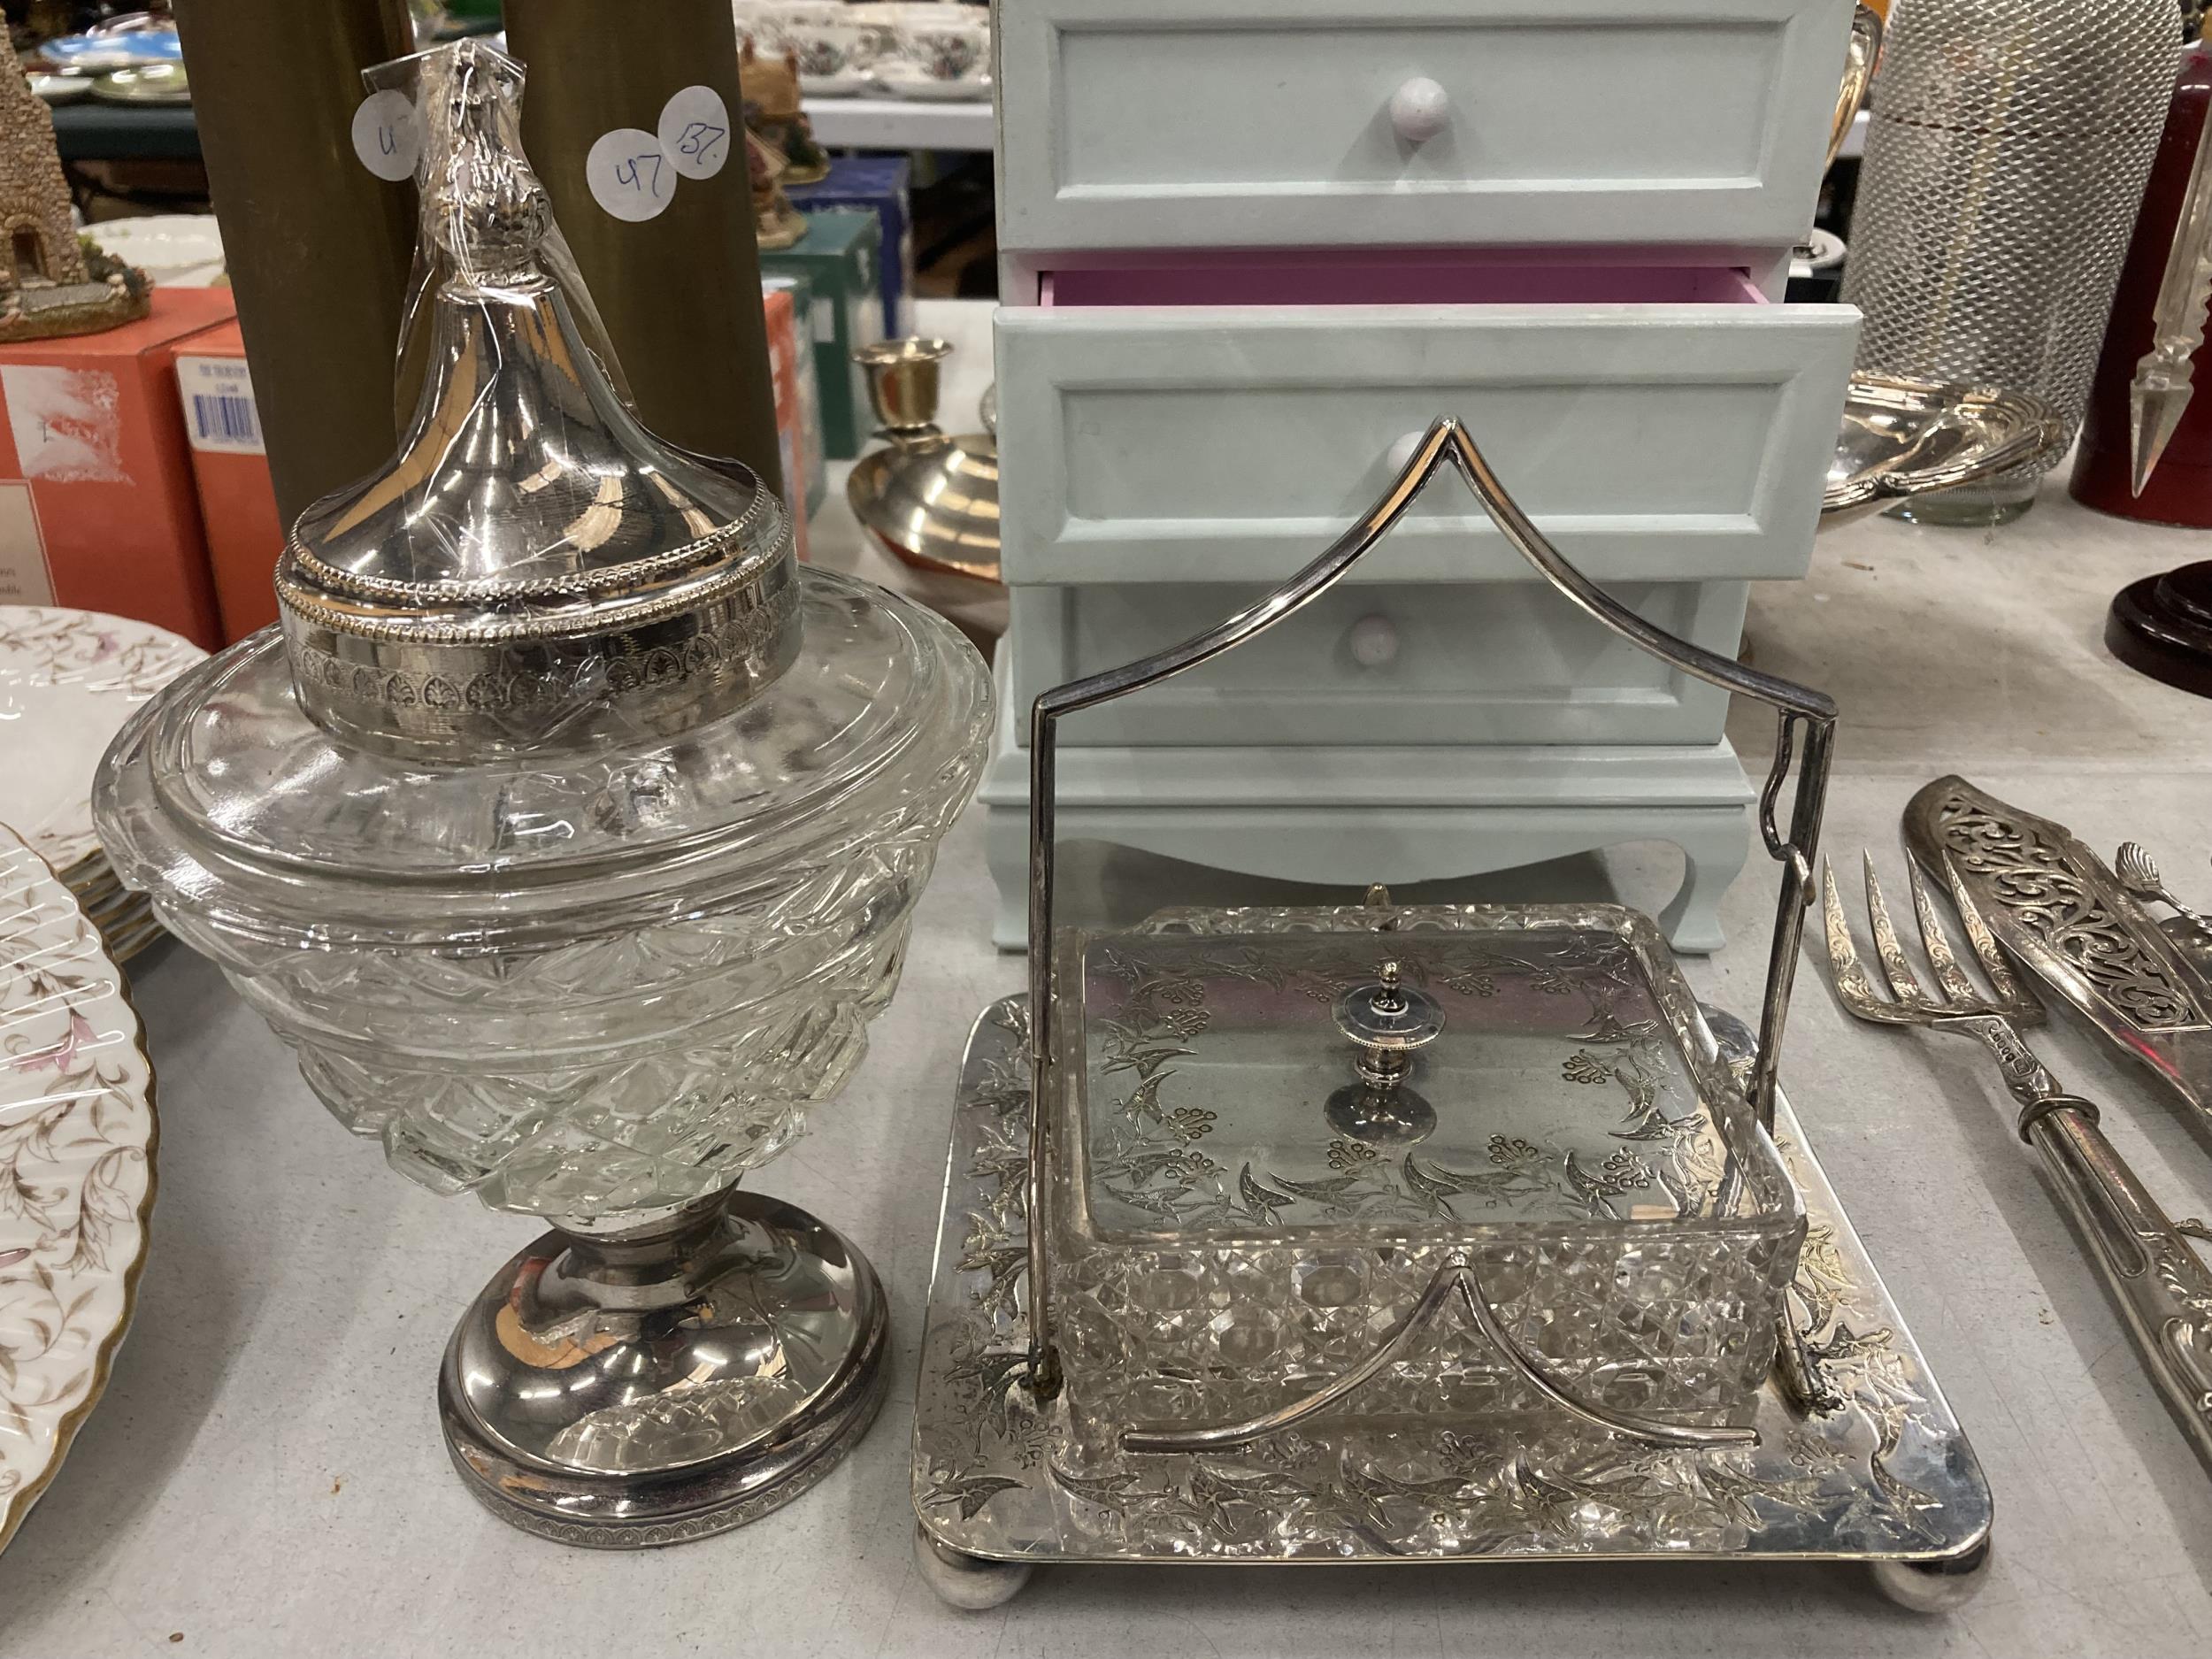 TWO SILVER PLATED ITEMS, LIDDED BOX ON STAND AND LIDDED JAR